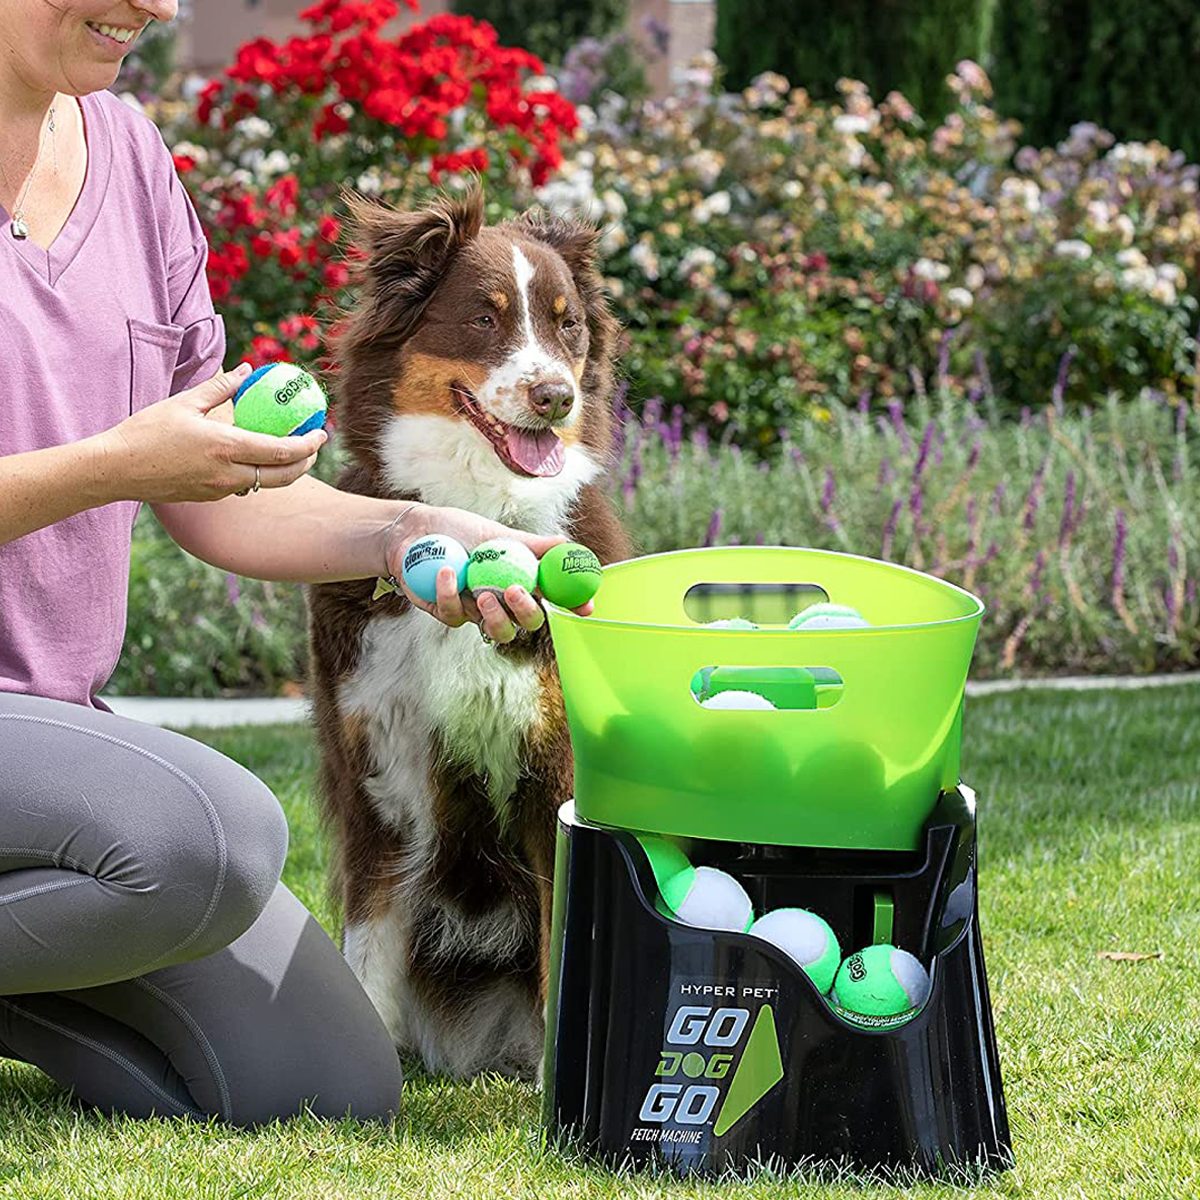 19 Toys to Keep Your Pet Active This Winter